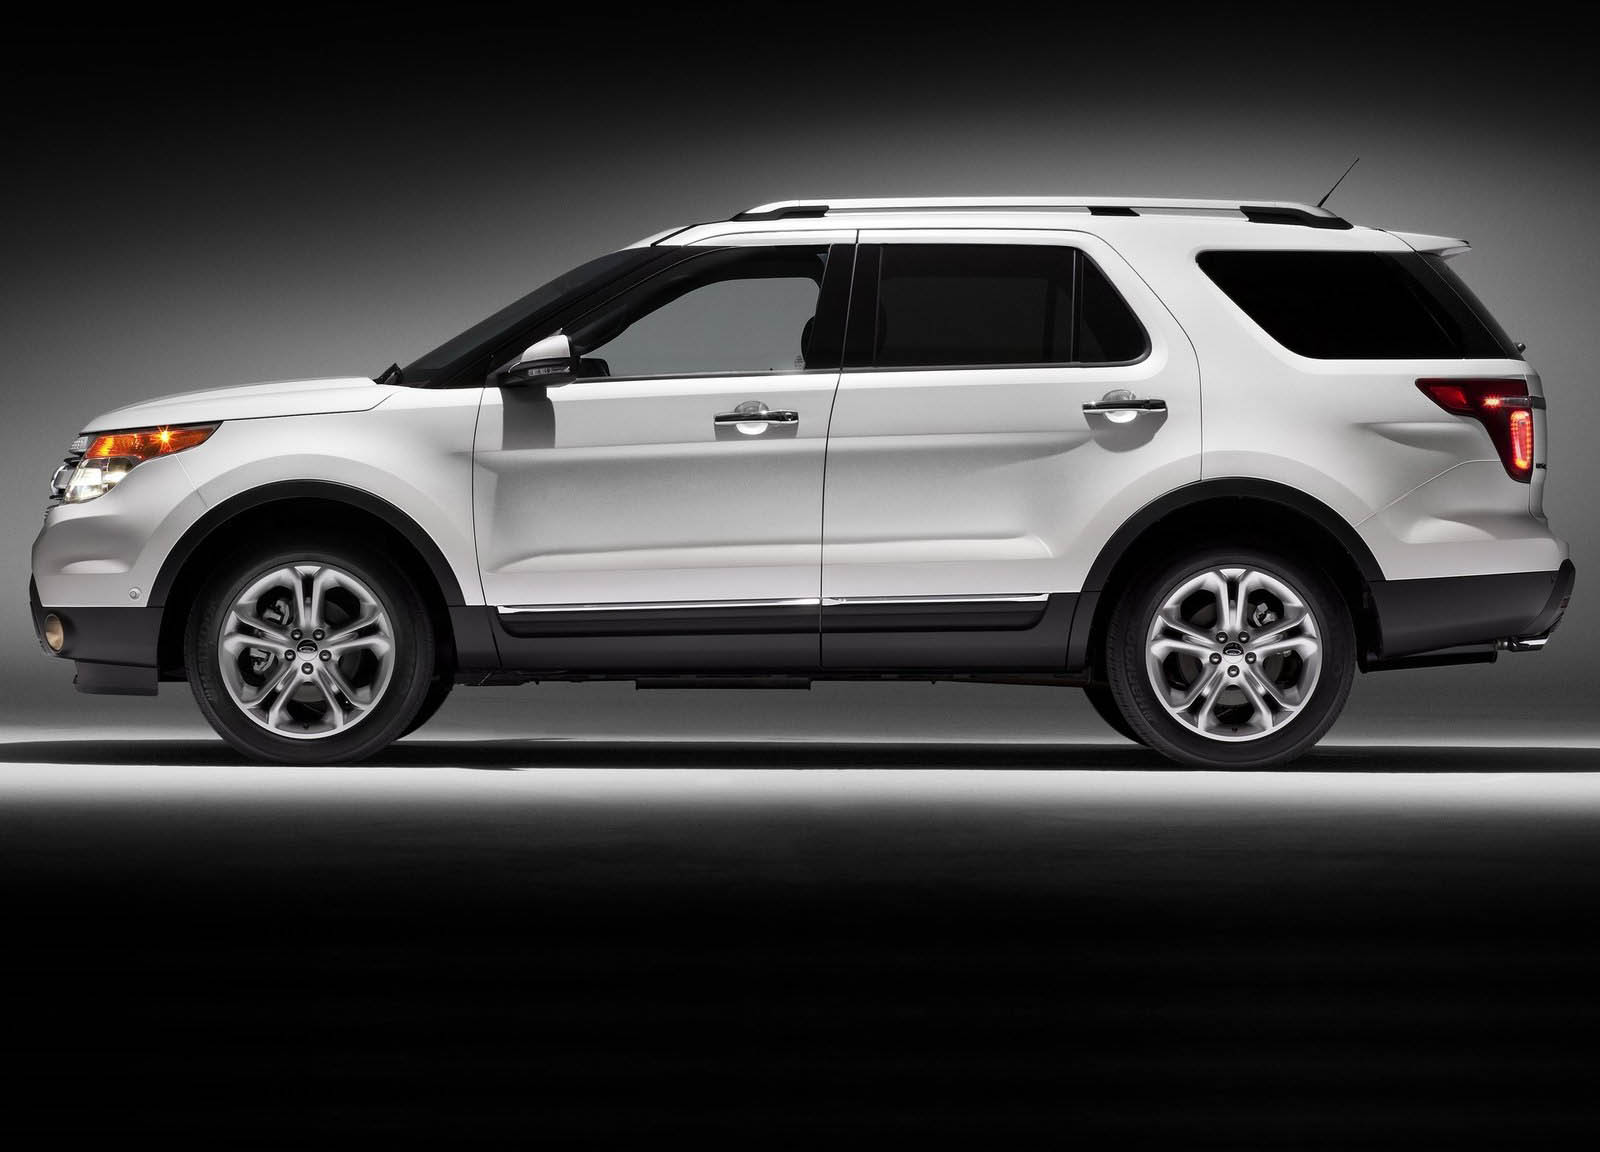 Safety Group Urges Ford To Recall Explorer Over Carbon Monoxide Leaks